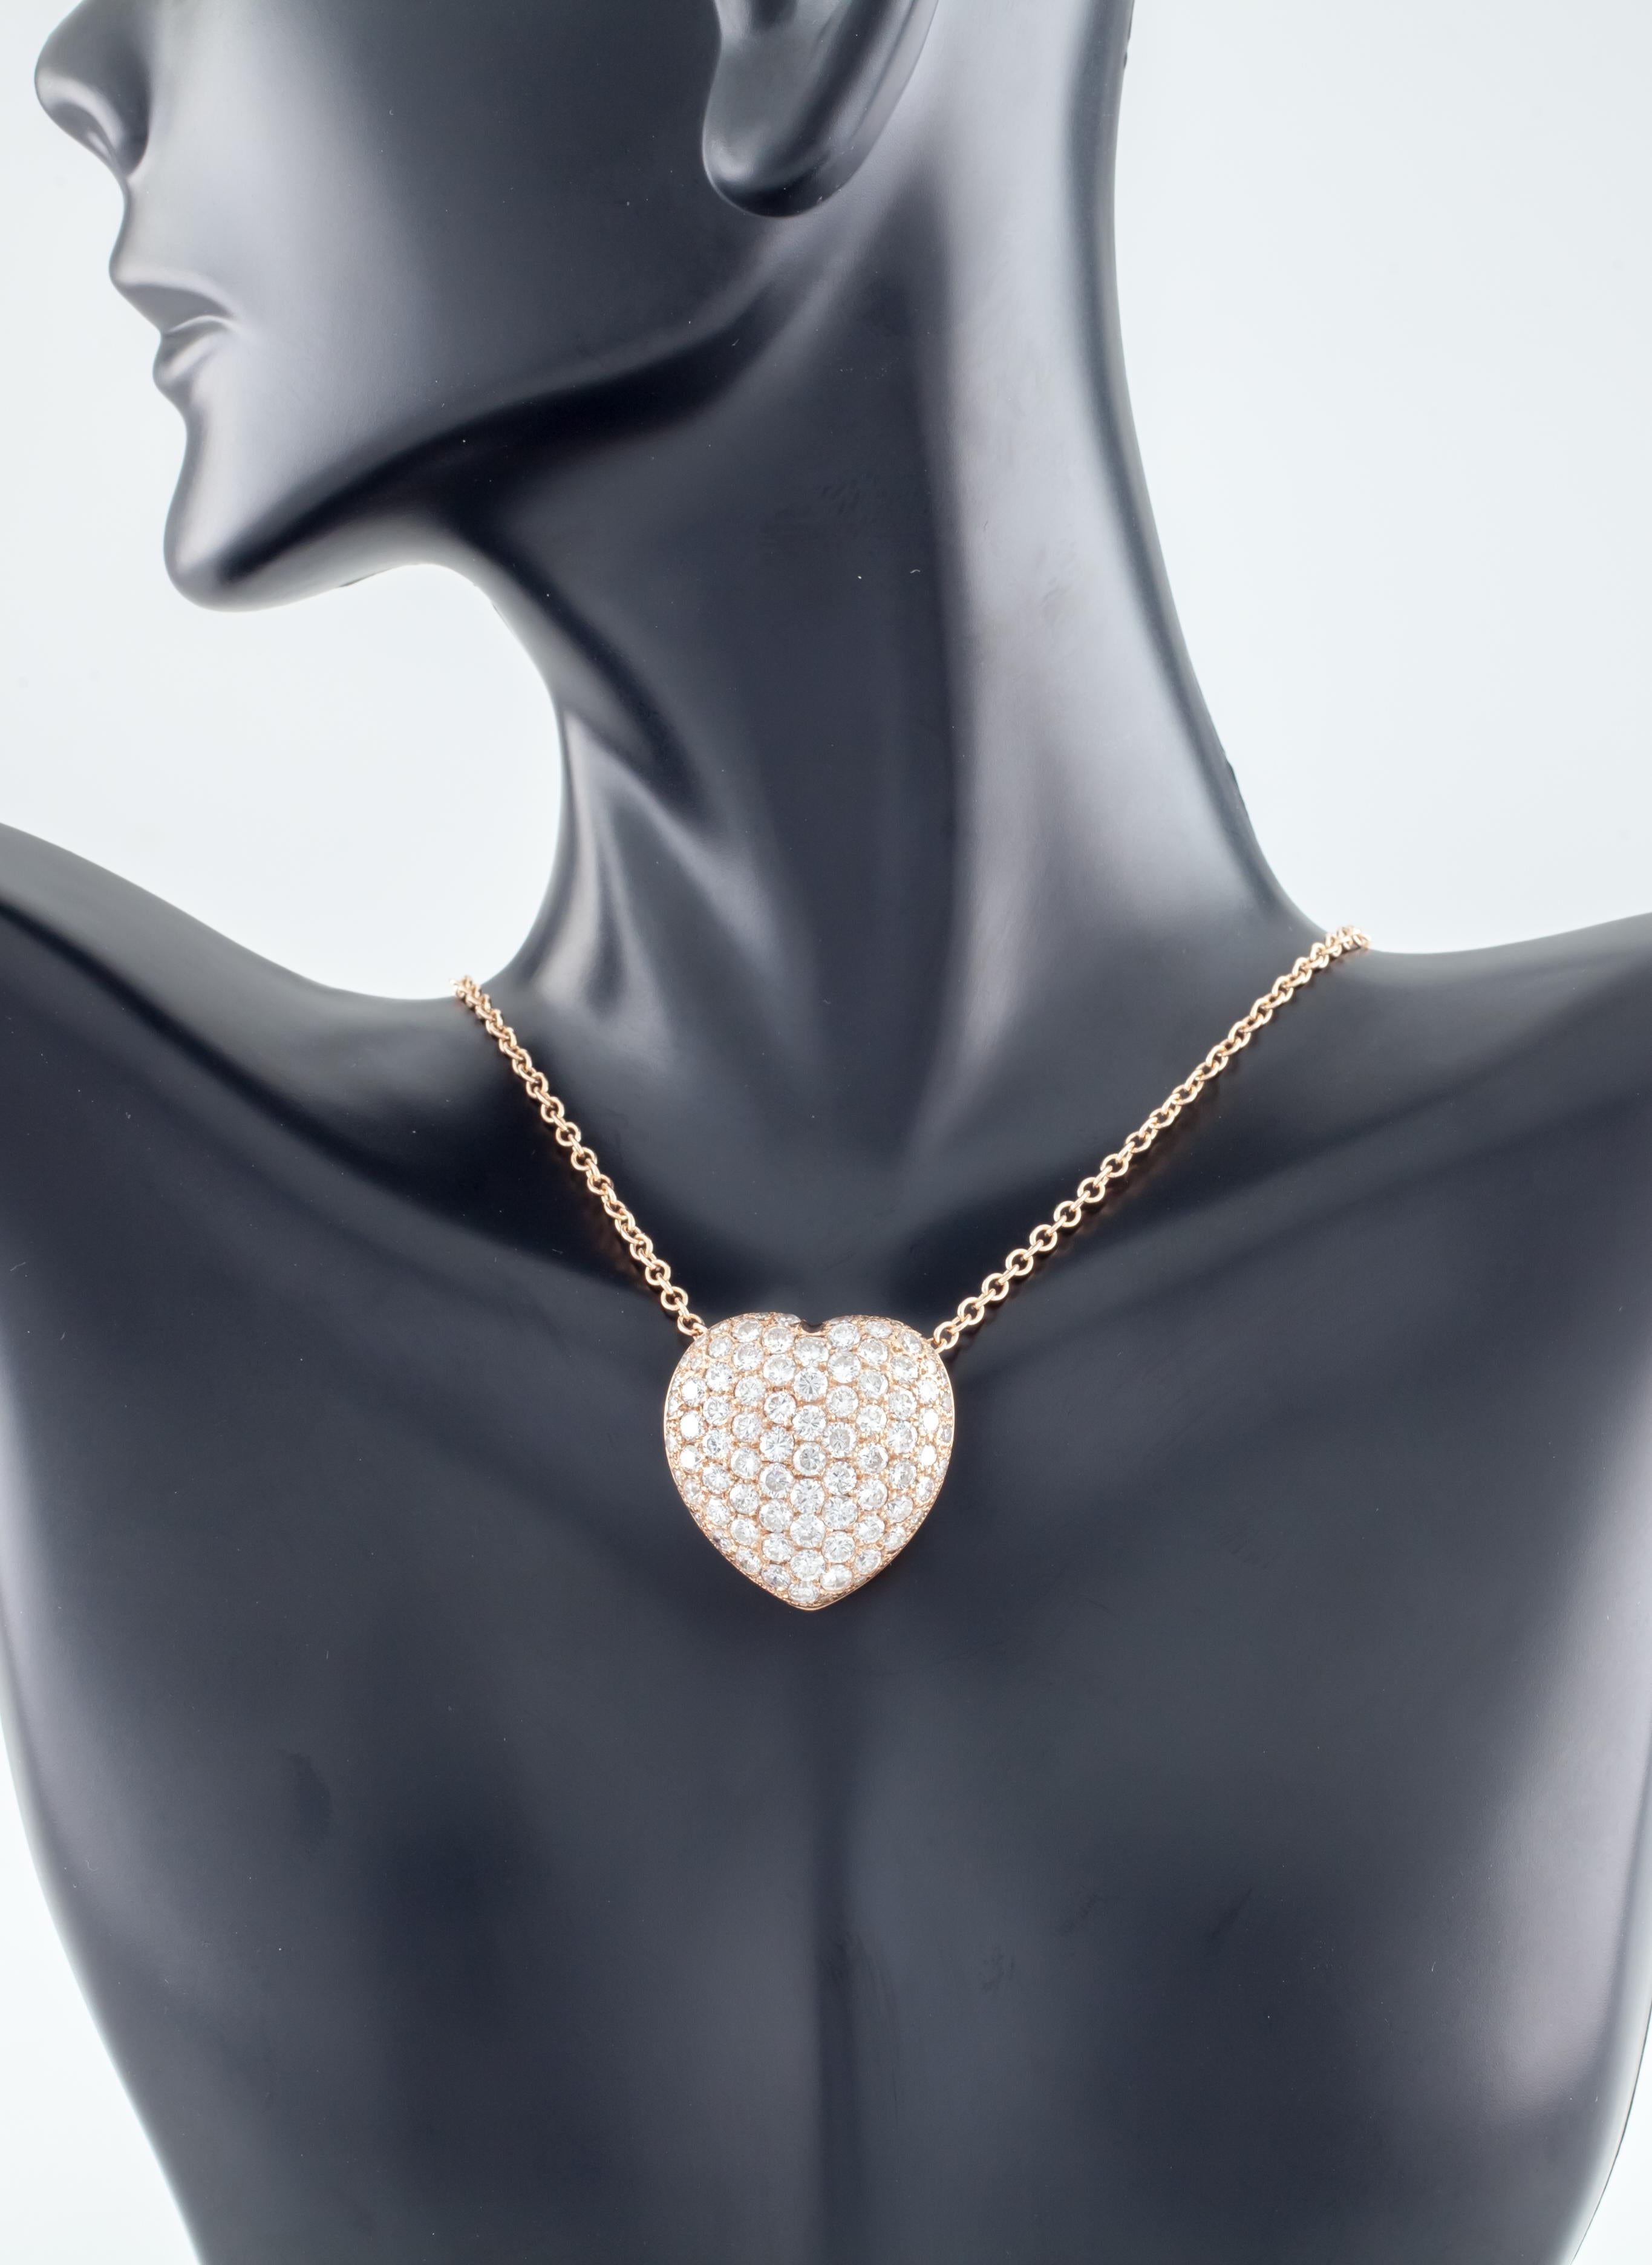 Gorgeous 14k Rose Gold Pave Heart Pendant
Features Pave Set Round Diamonds in Domed Heart Pendant
Width of Pendant = 24 mm Wide
Length of Pendant = 25 mm Long
20